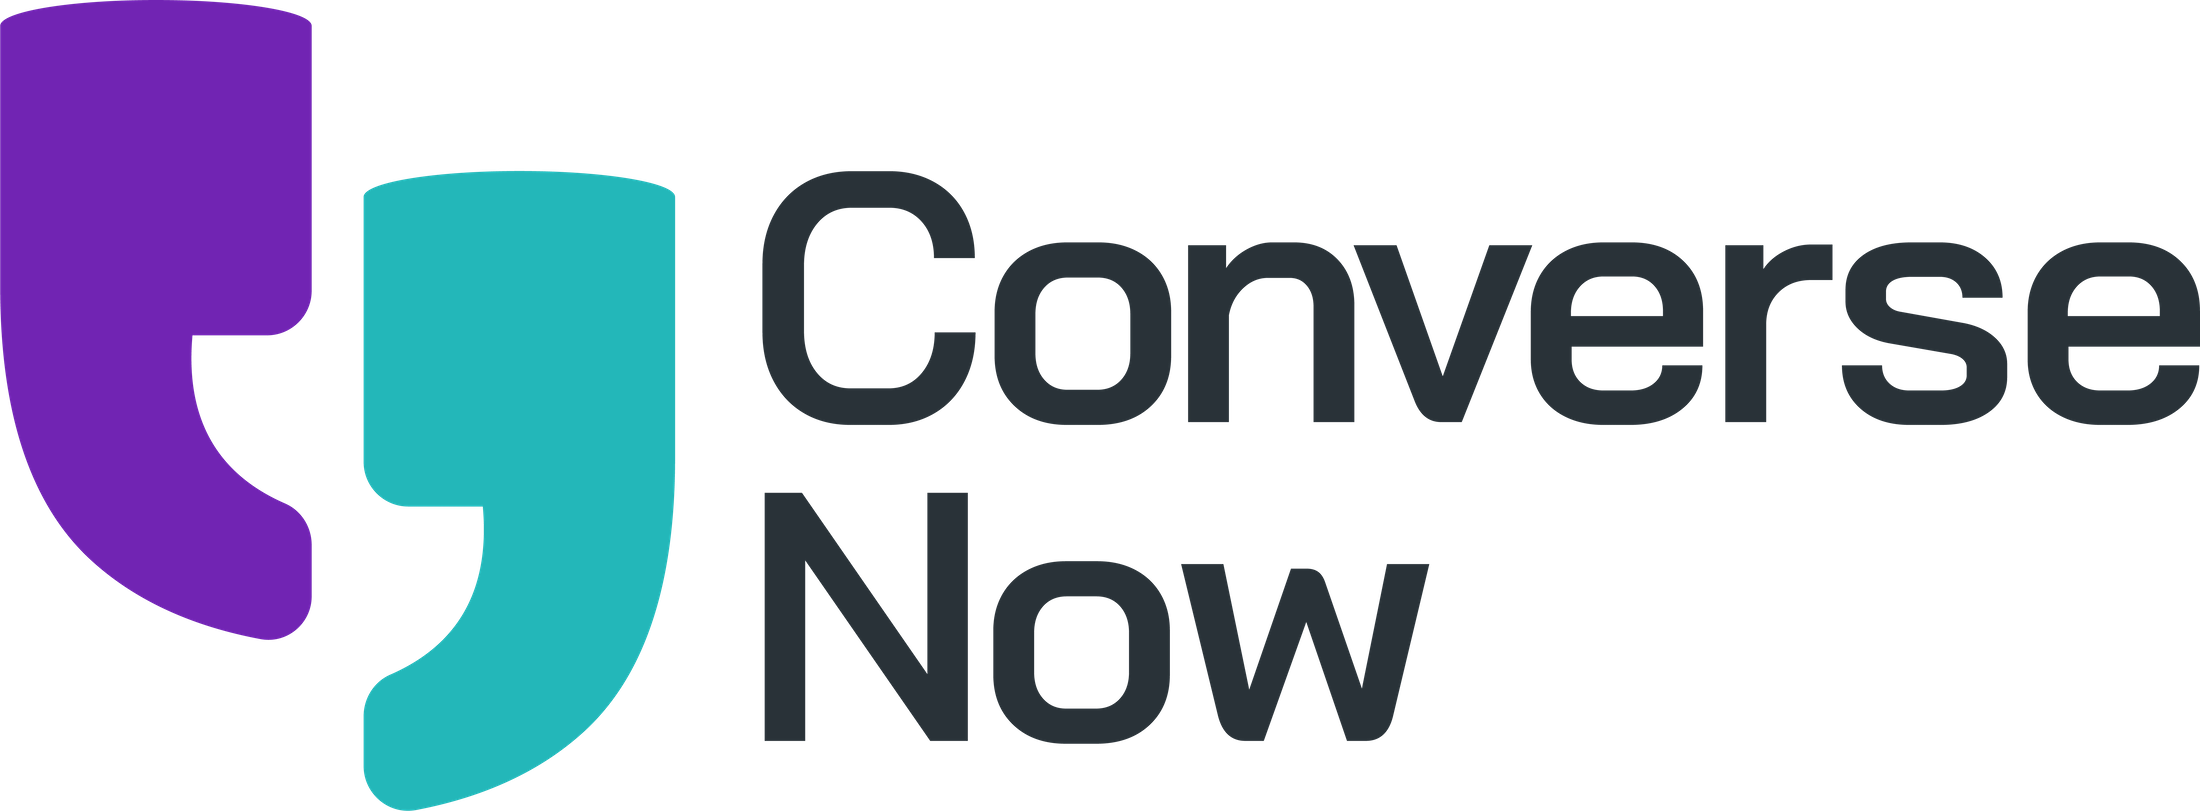 ConverseNow acquires former voice AI competitor Valyant AI